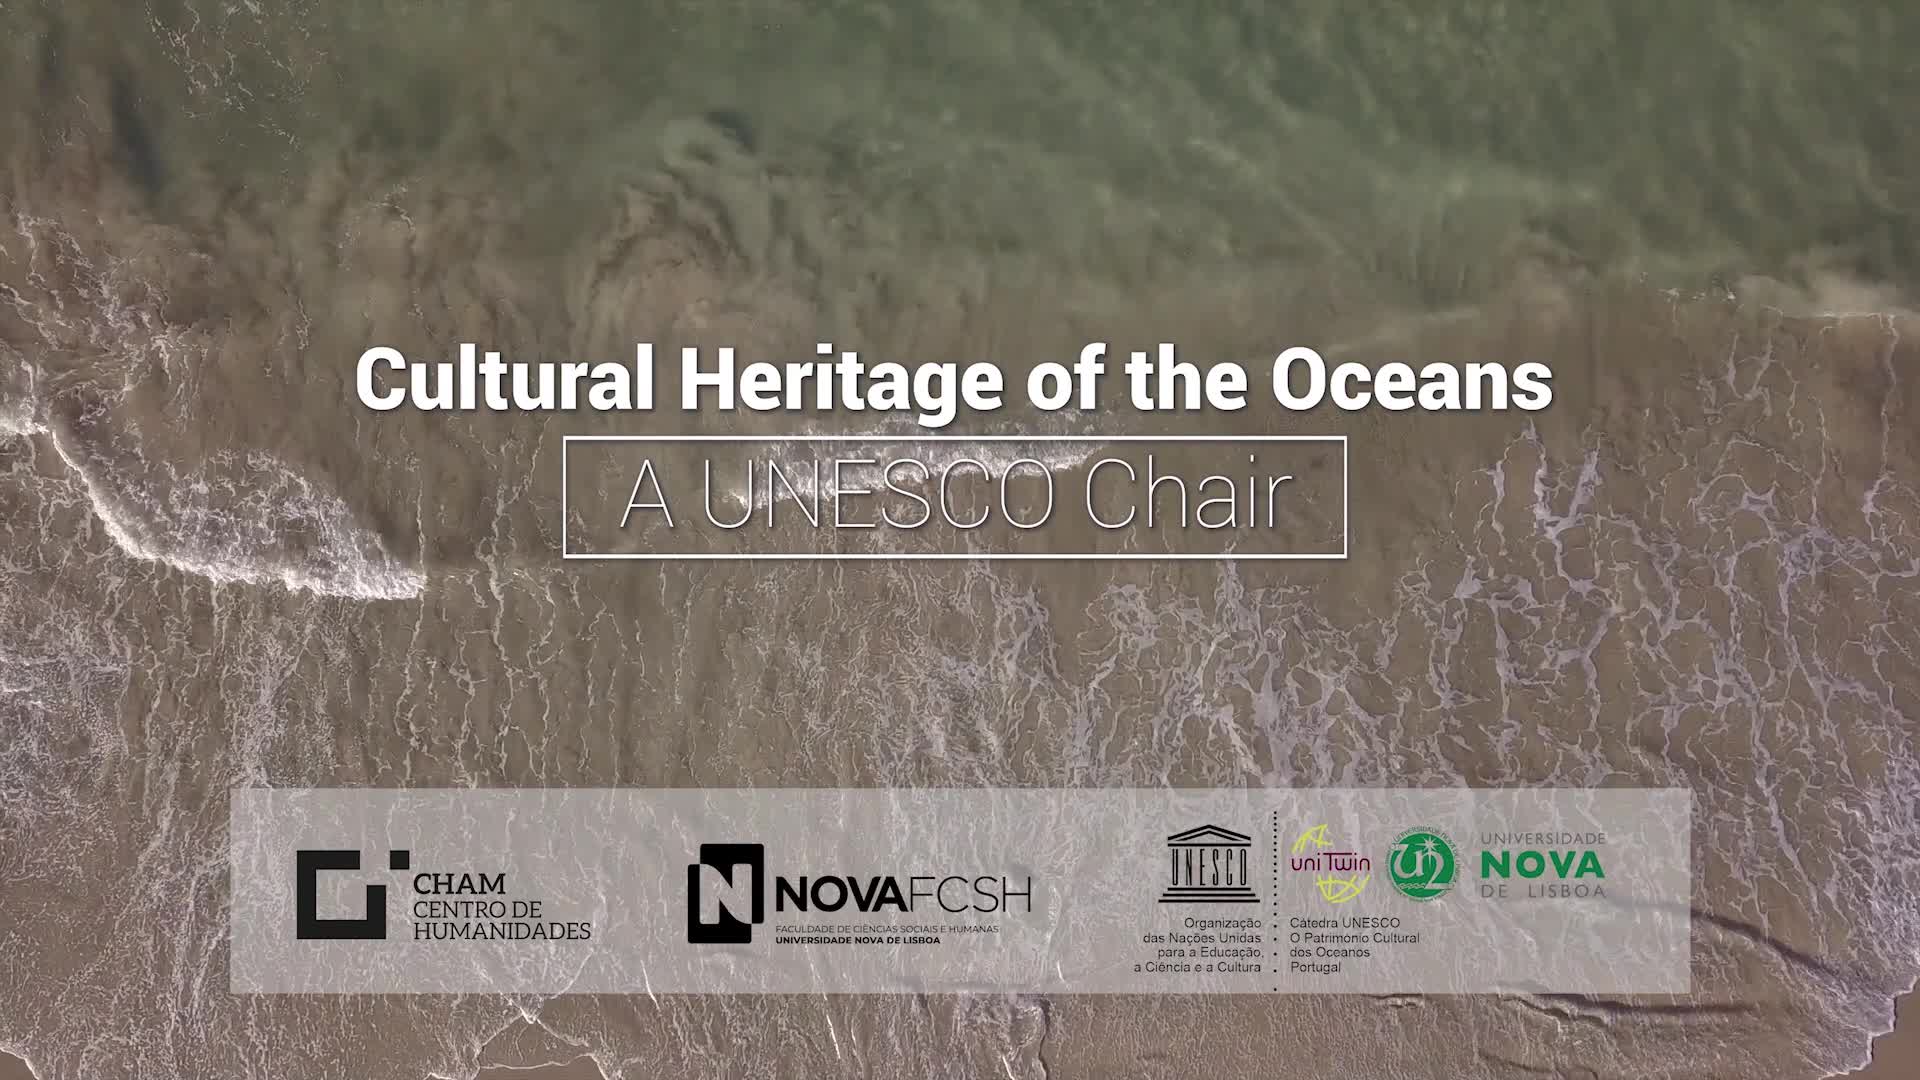  Cultural Heritage of the Oceans